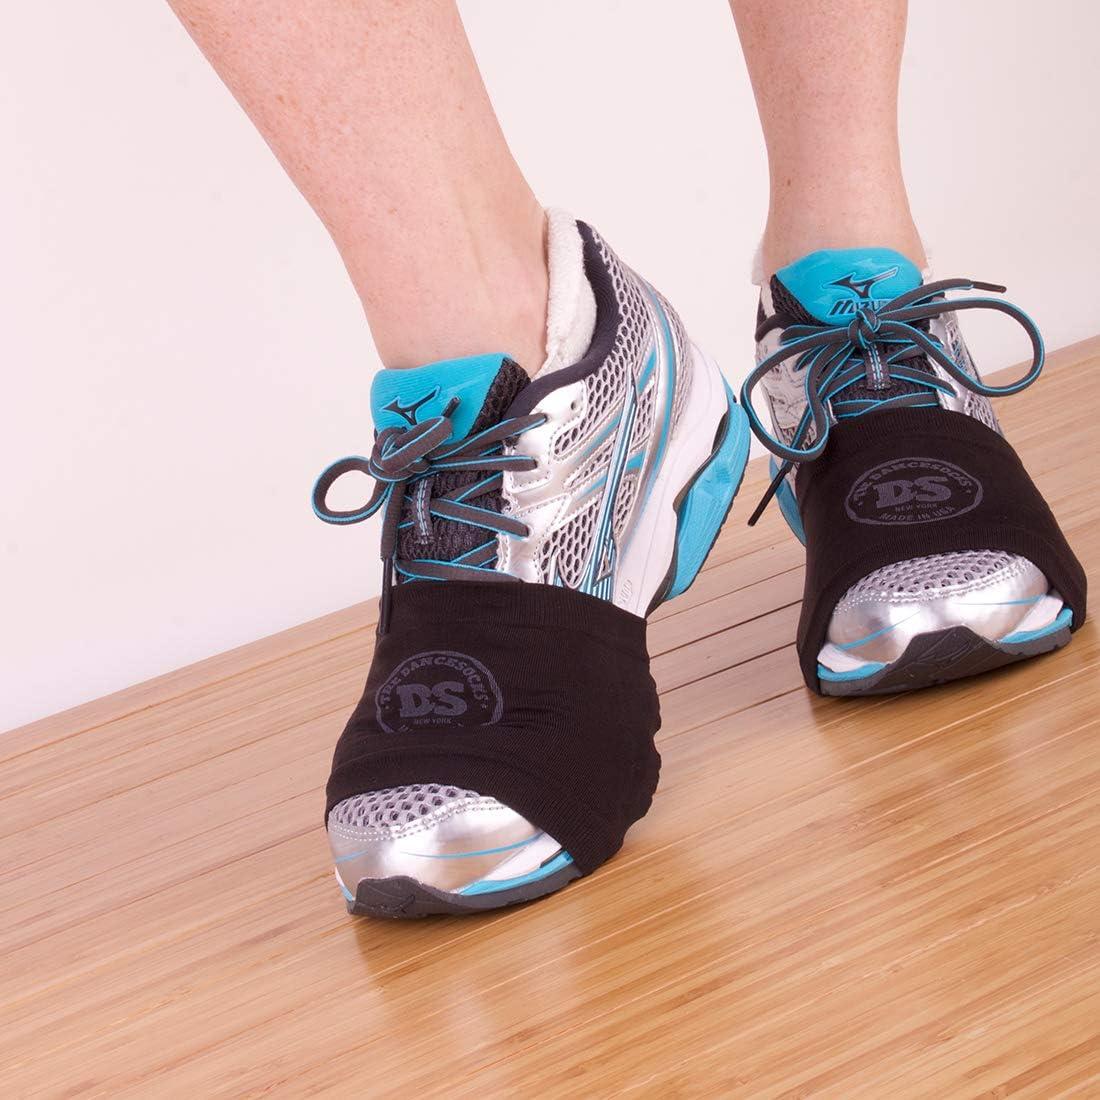 2 FEET Sock for Dancing on Smooth Floors, Over Sneakers, Smooth Pivots &  Turns to Dance with Style on Wood Floors